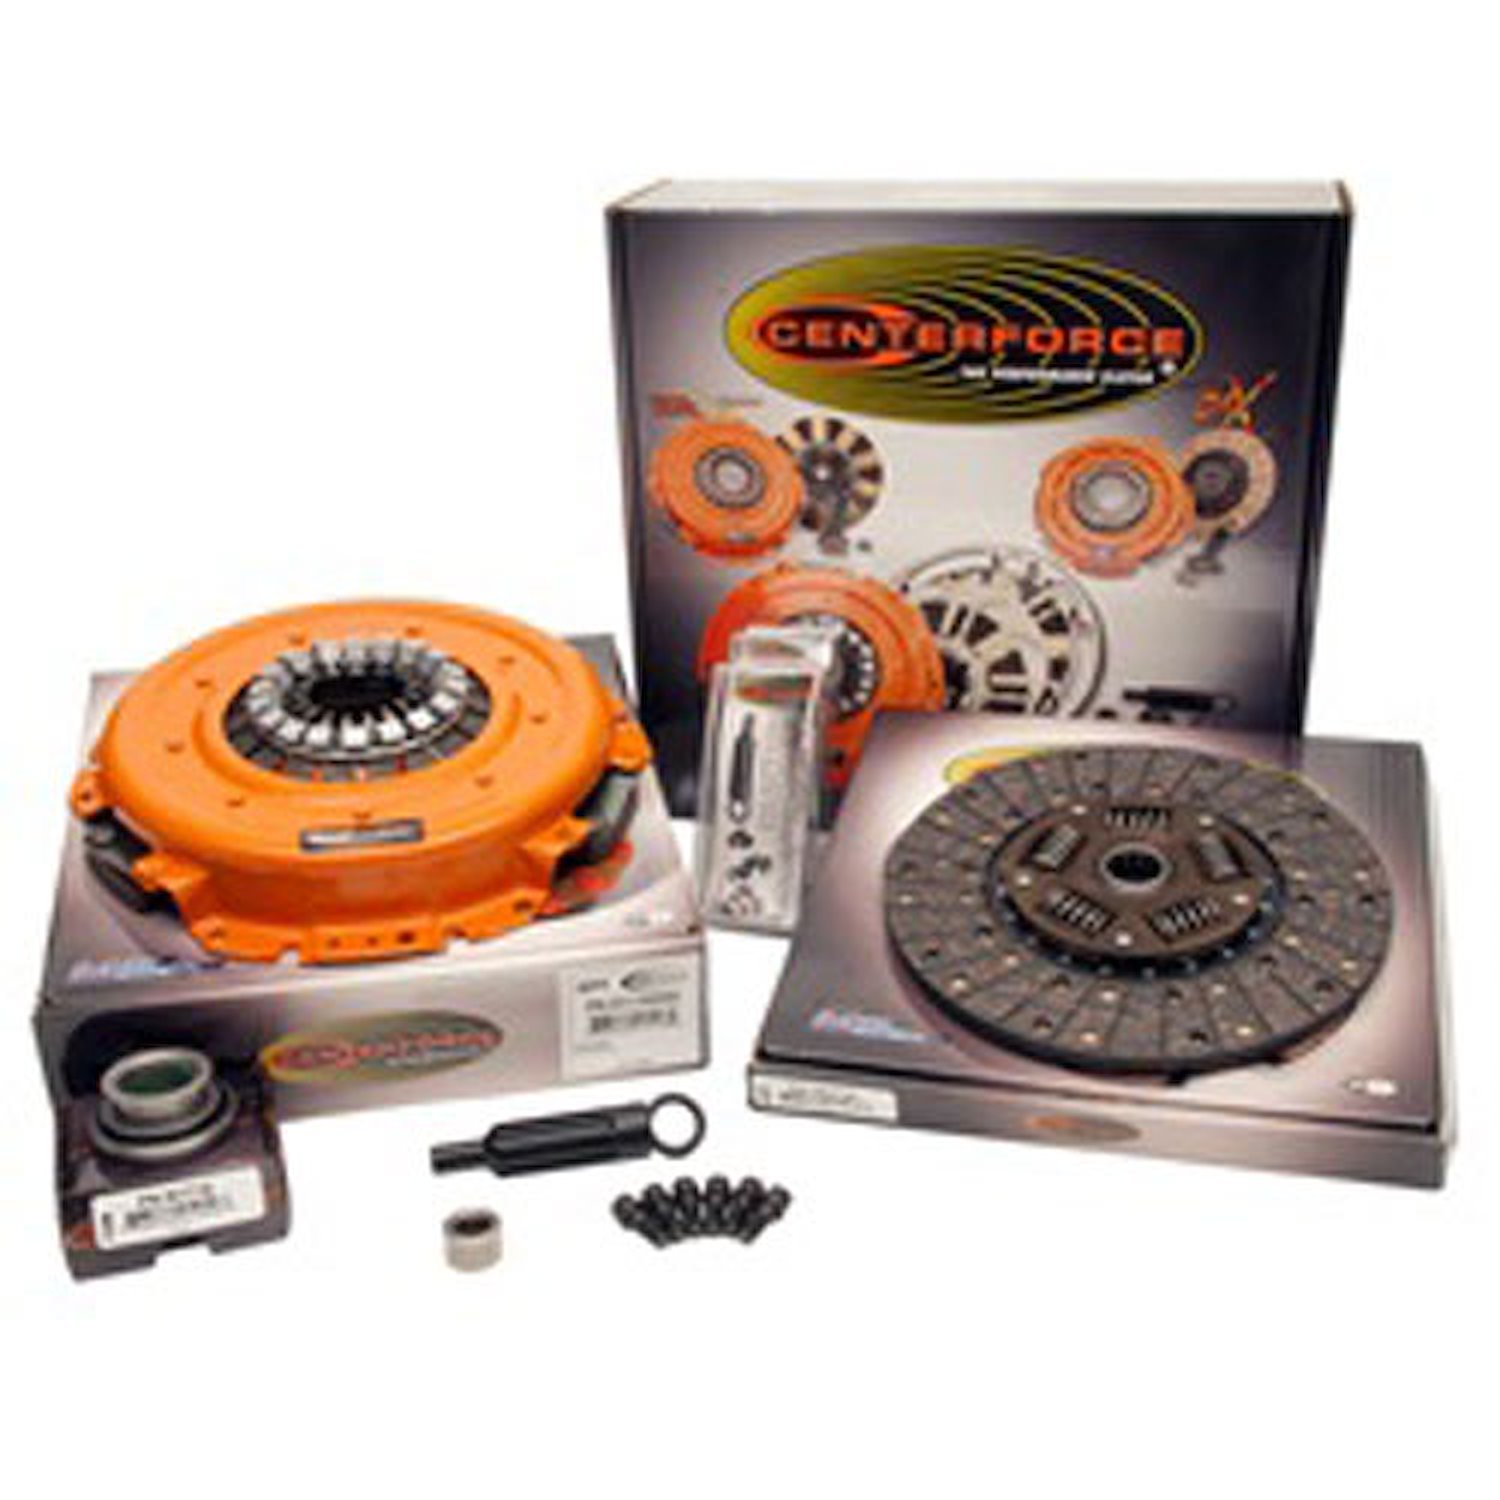 Centerforce II Full Clutch Kit Includes Pressure Plate, Disc, Throw Out Bearing, Pilot Bearing, Bolts, And Alignment Tool